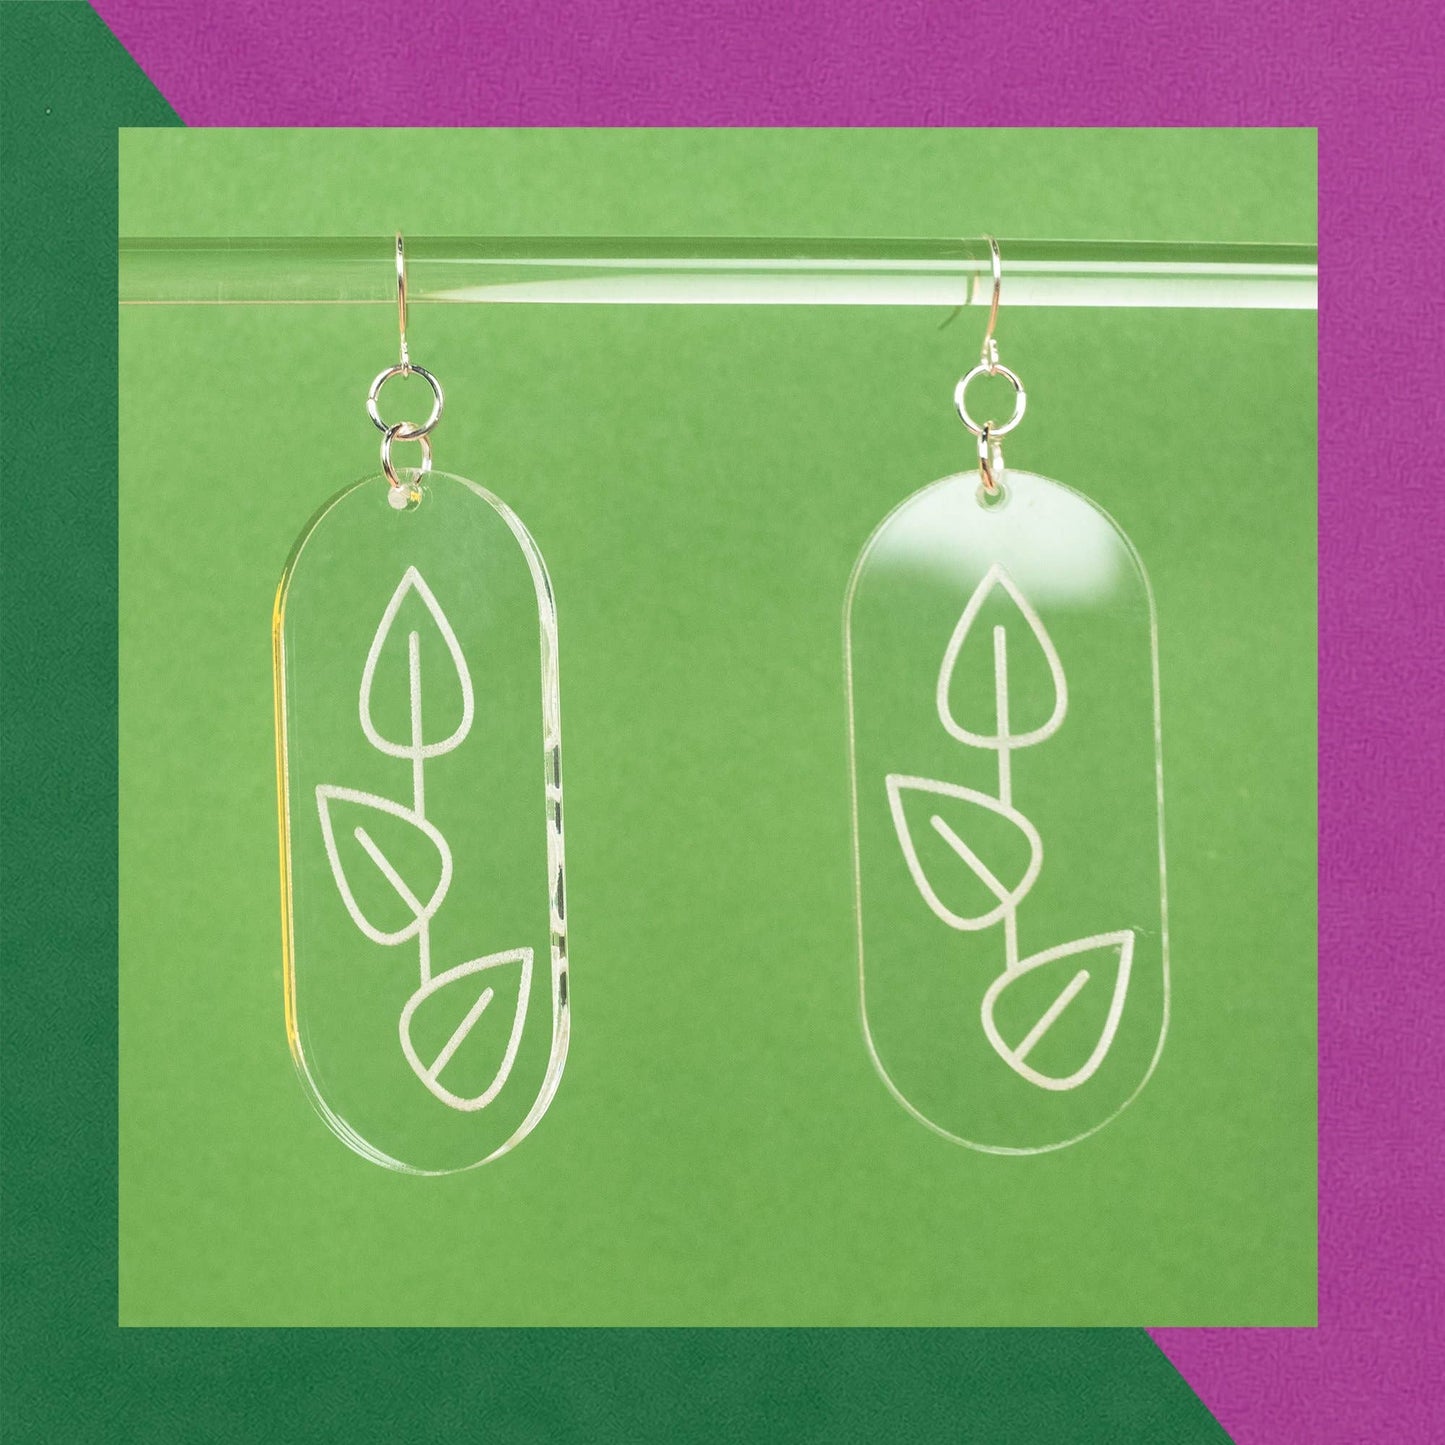 Frank Goodness - Ivy League Drop Earrings in Clear Lucite